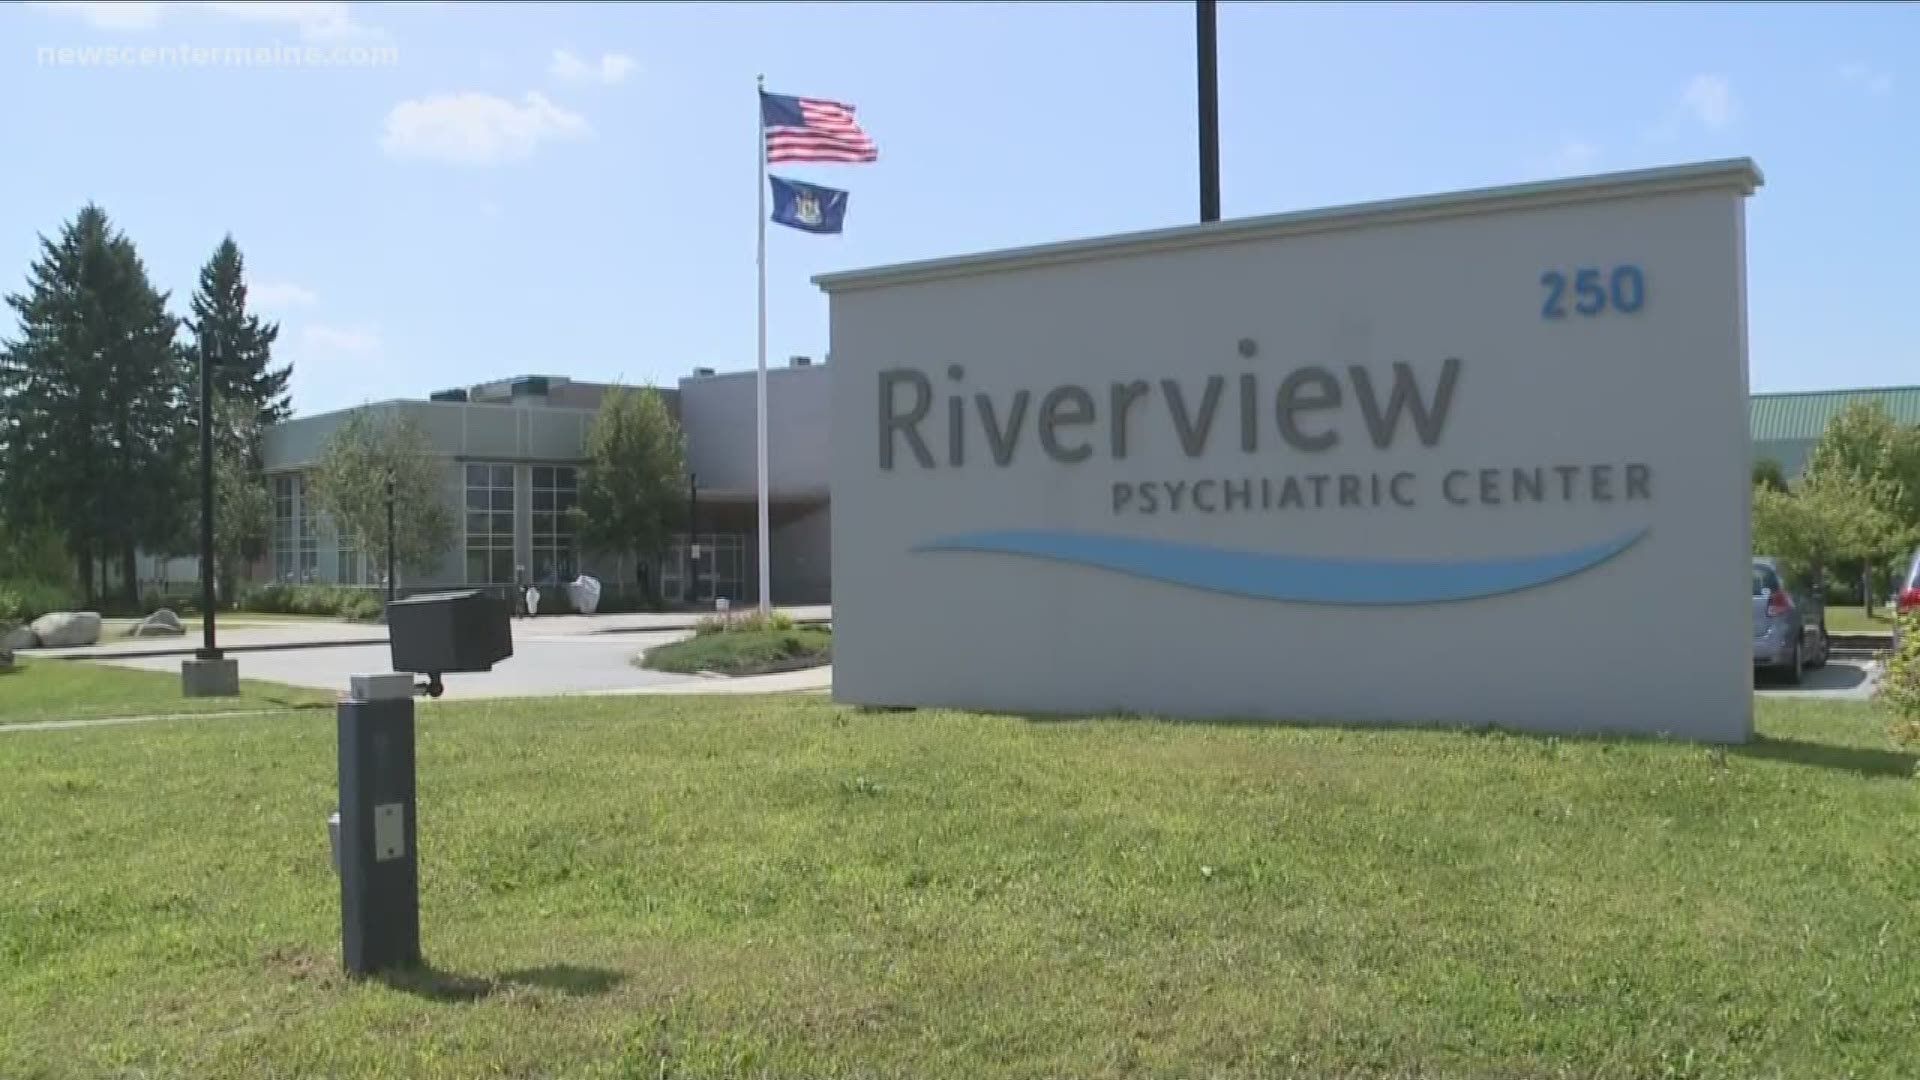 The Riverview Psychiatric Center has been re-certified for Medicare after improvements to its system.